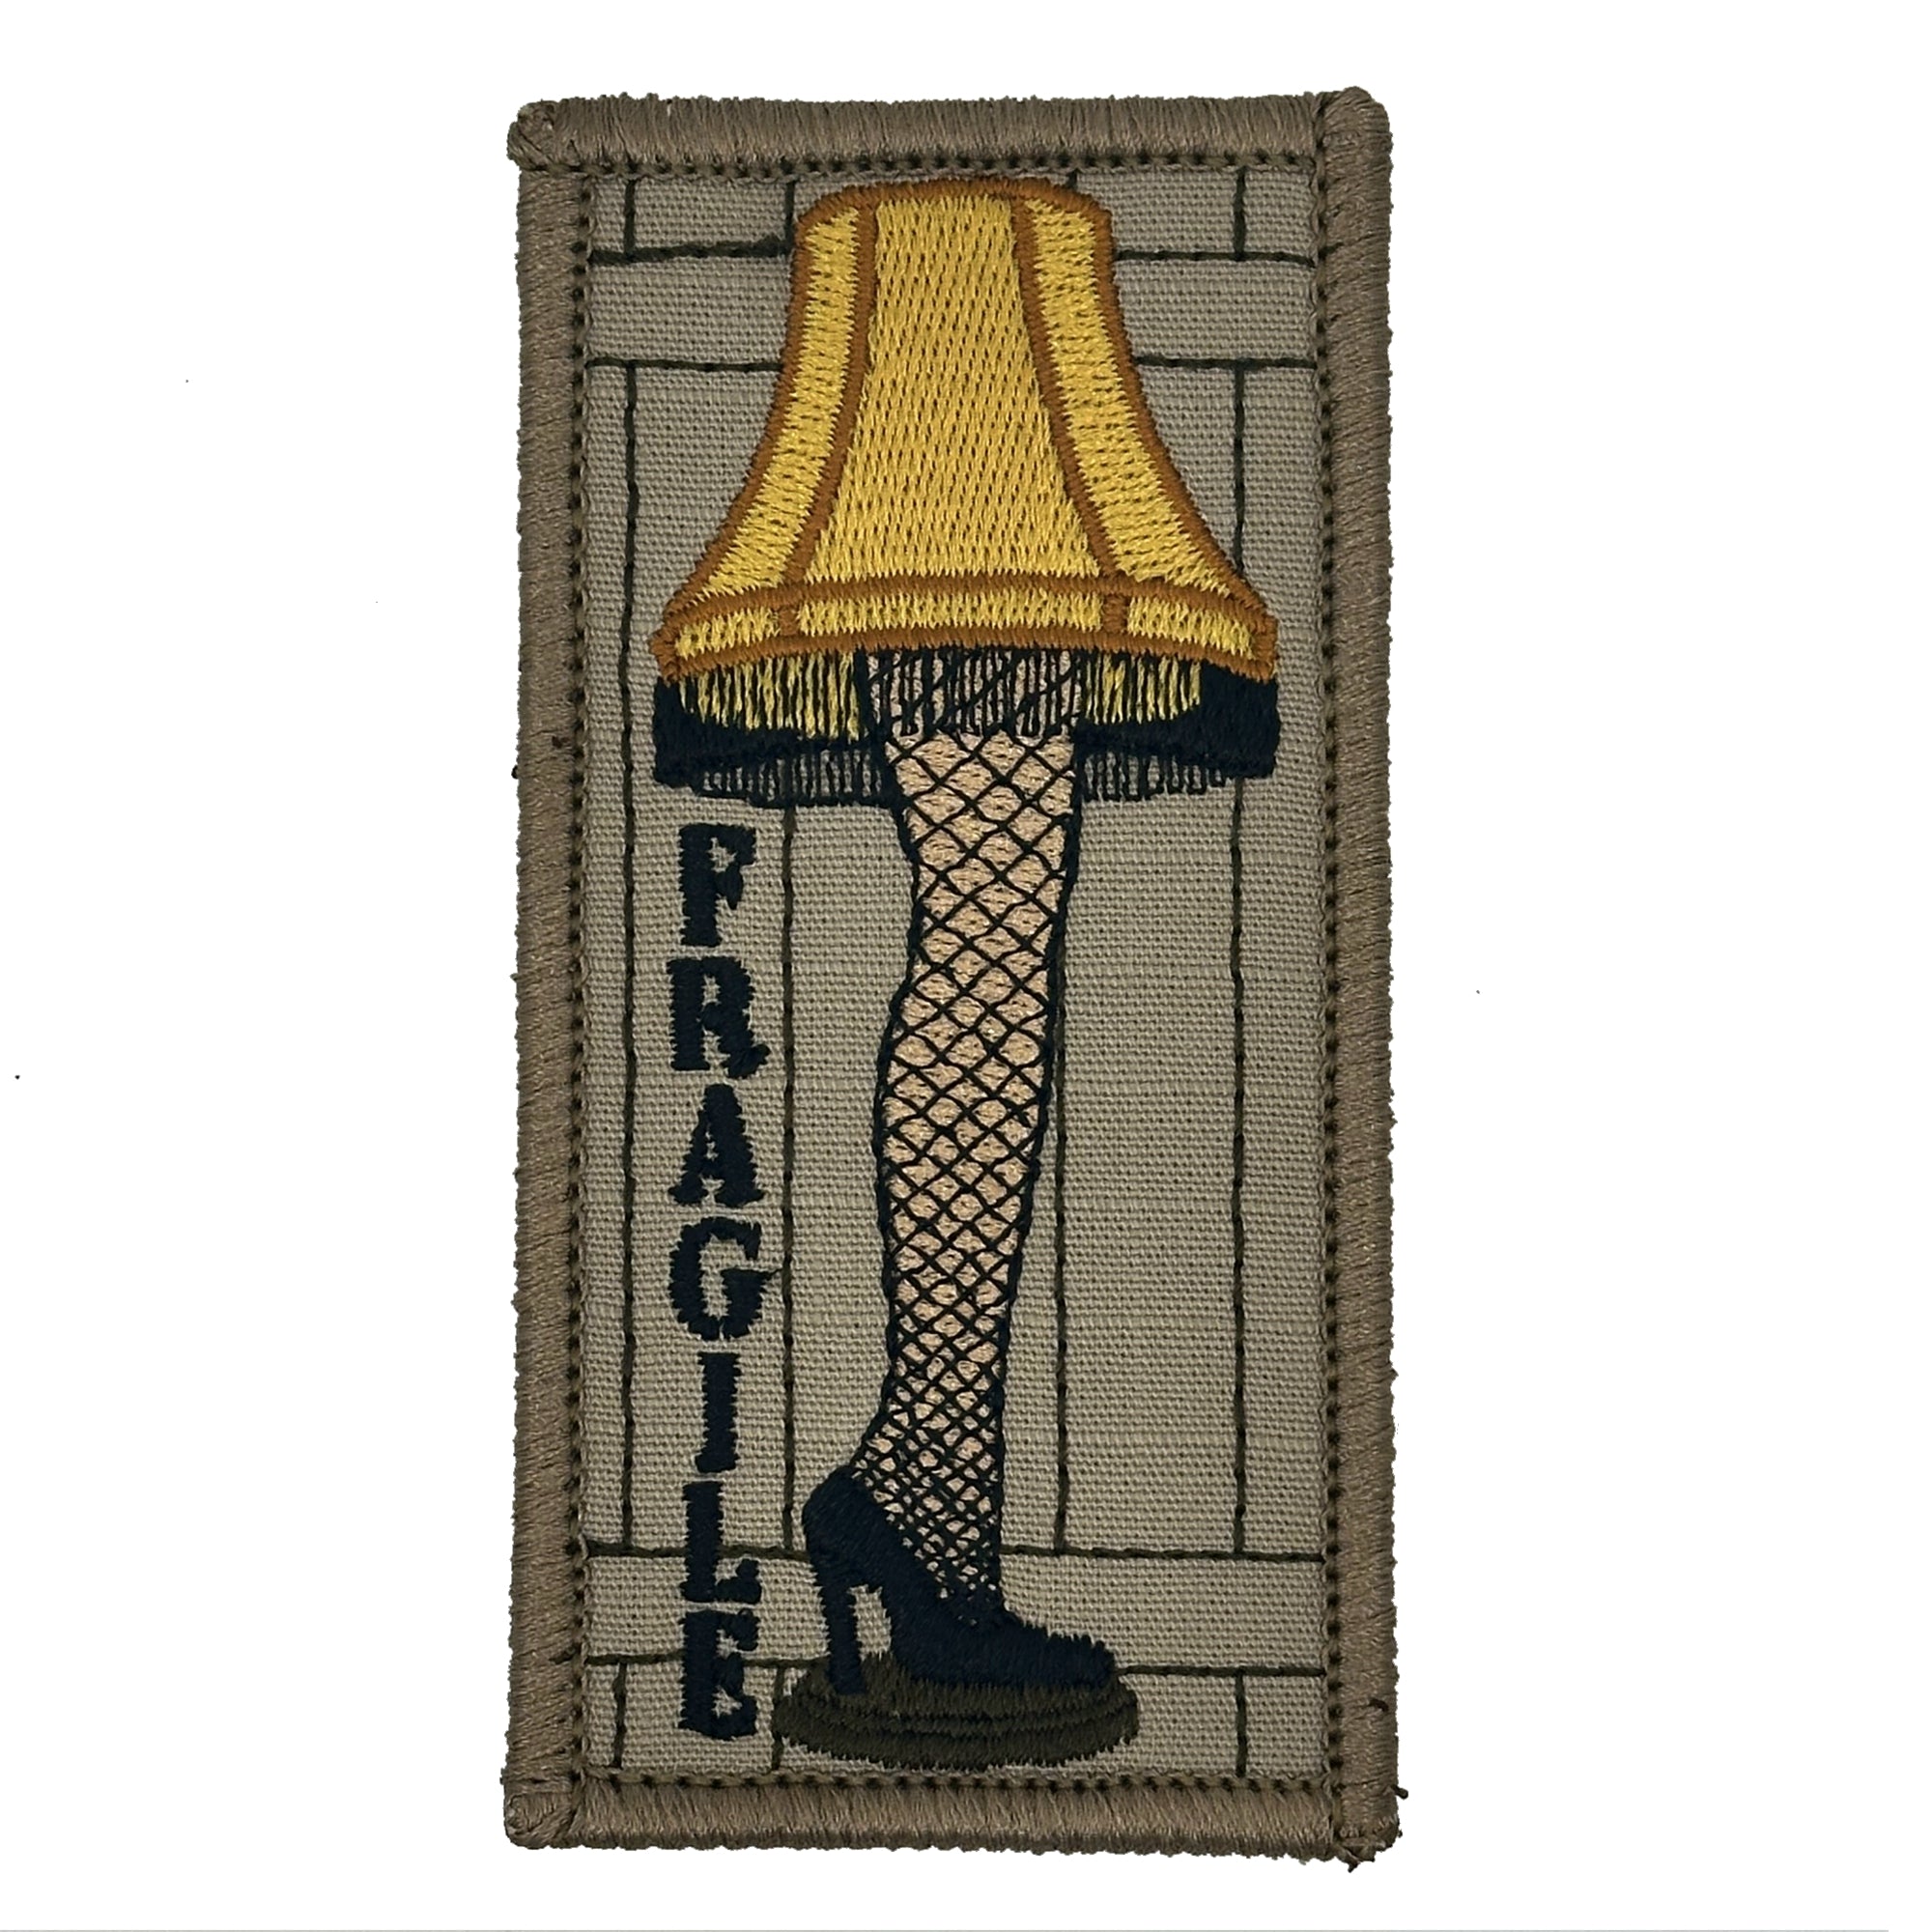 Fragile Leg Lamp Delight: A Christmas Story Patch - Glowing Nostalgia for Your Gear!